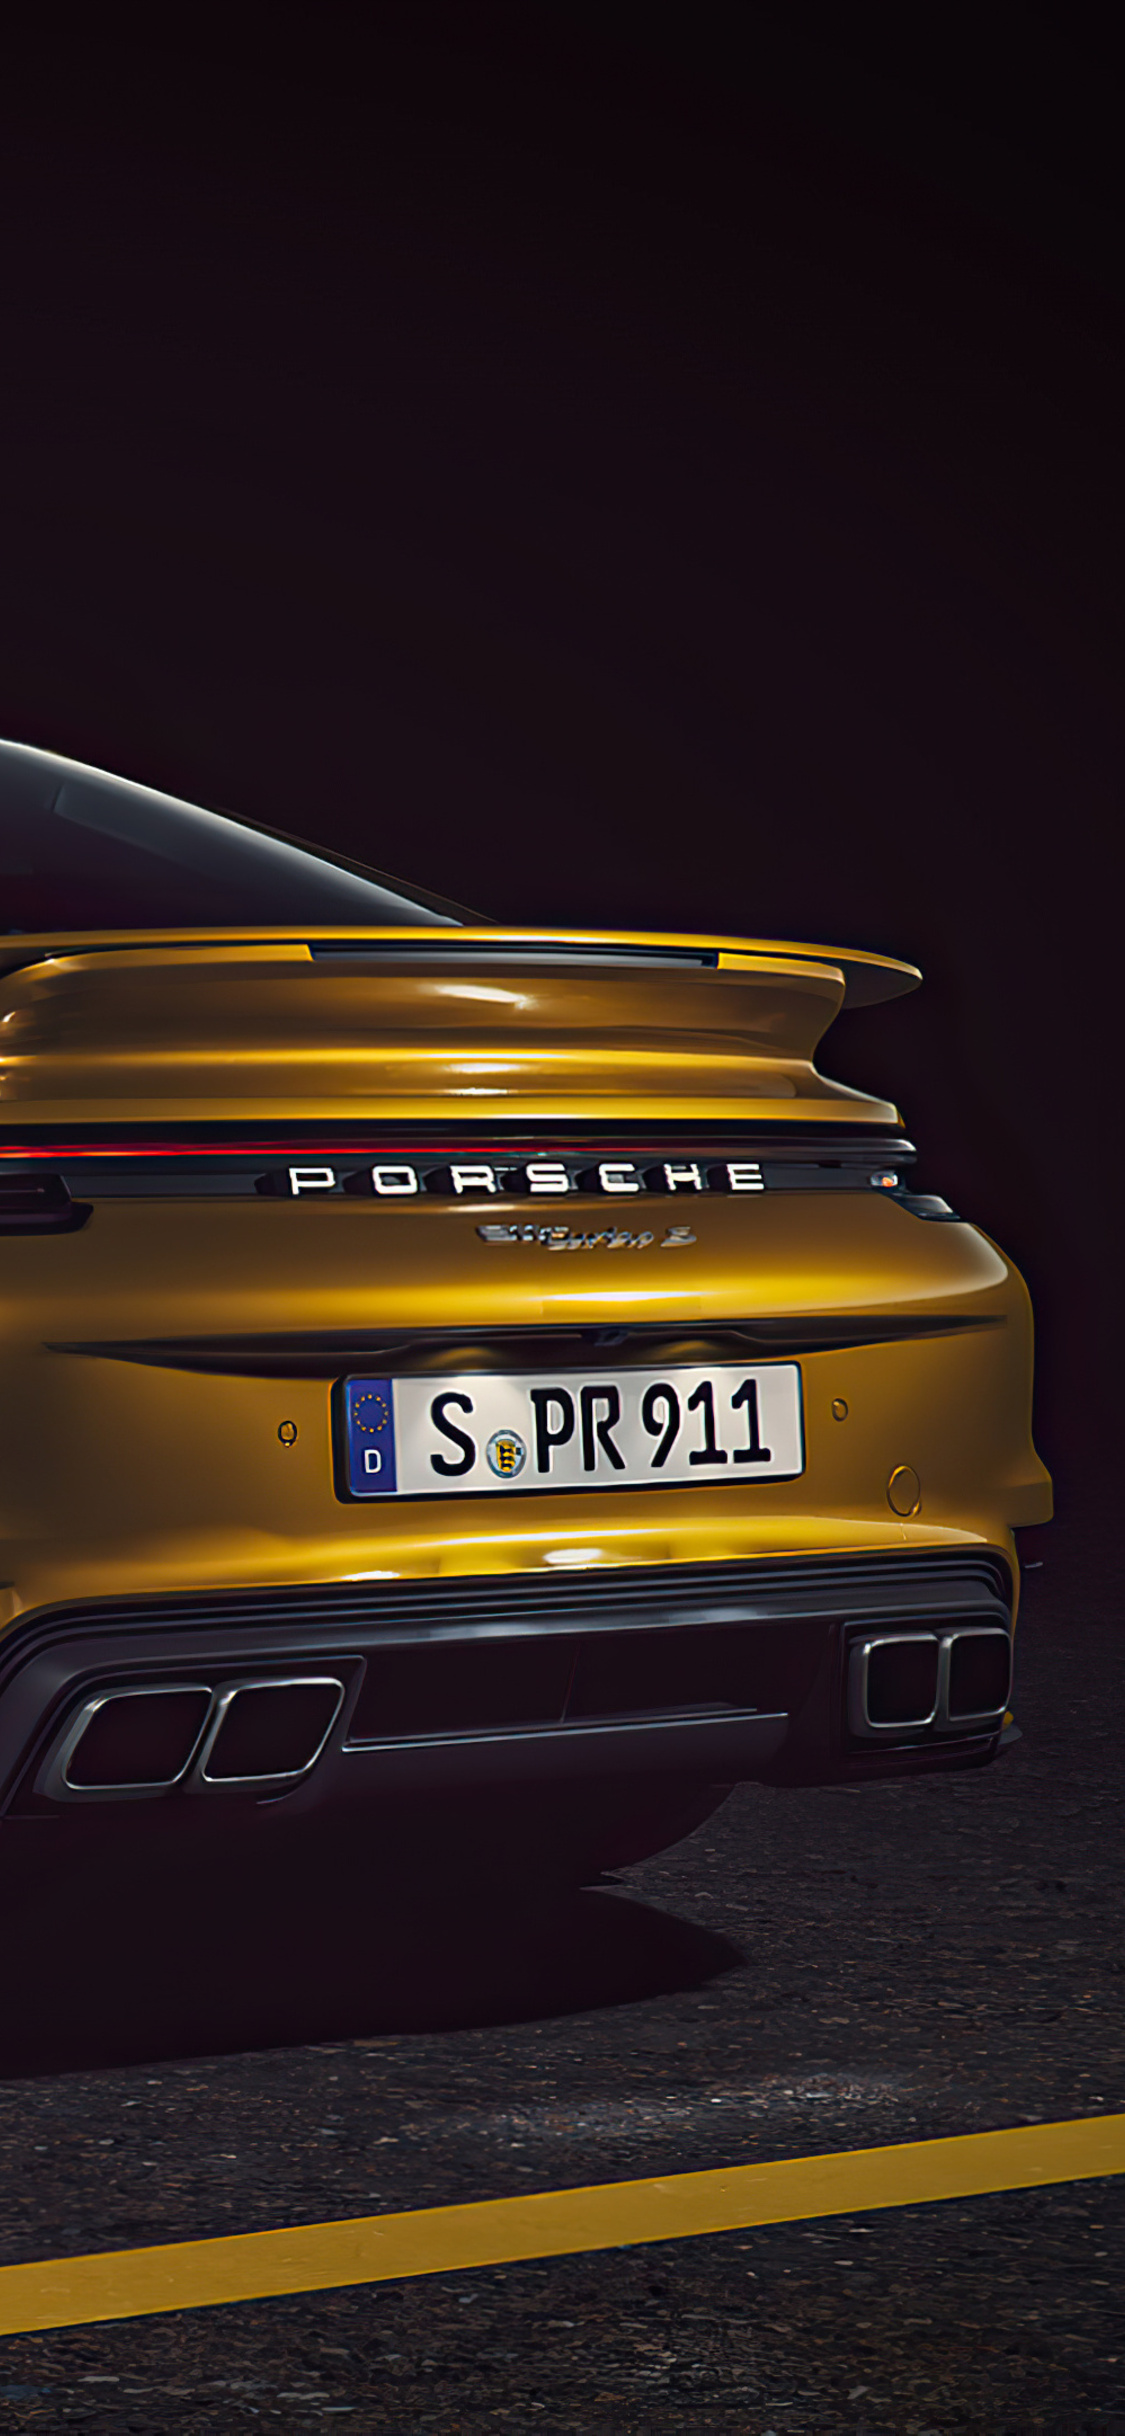 Porsche 911 Turbo S 4k 2020 iPhone XS, iPhone iPhone X HD 4k Wallpaper, Image, Background, Photo and Picture